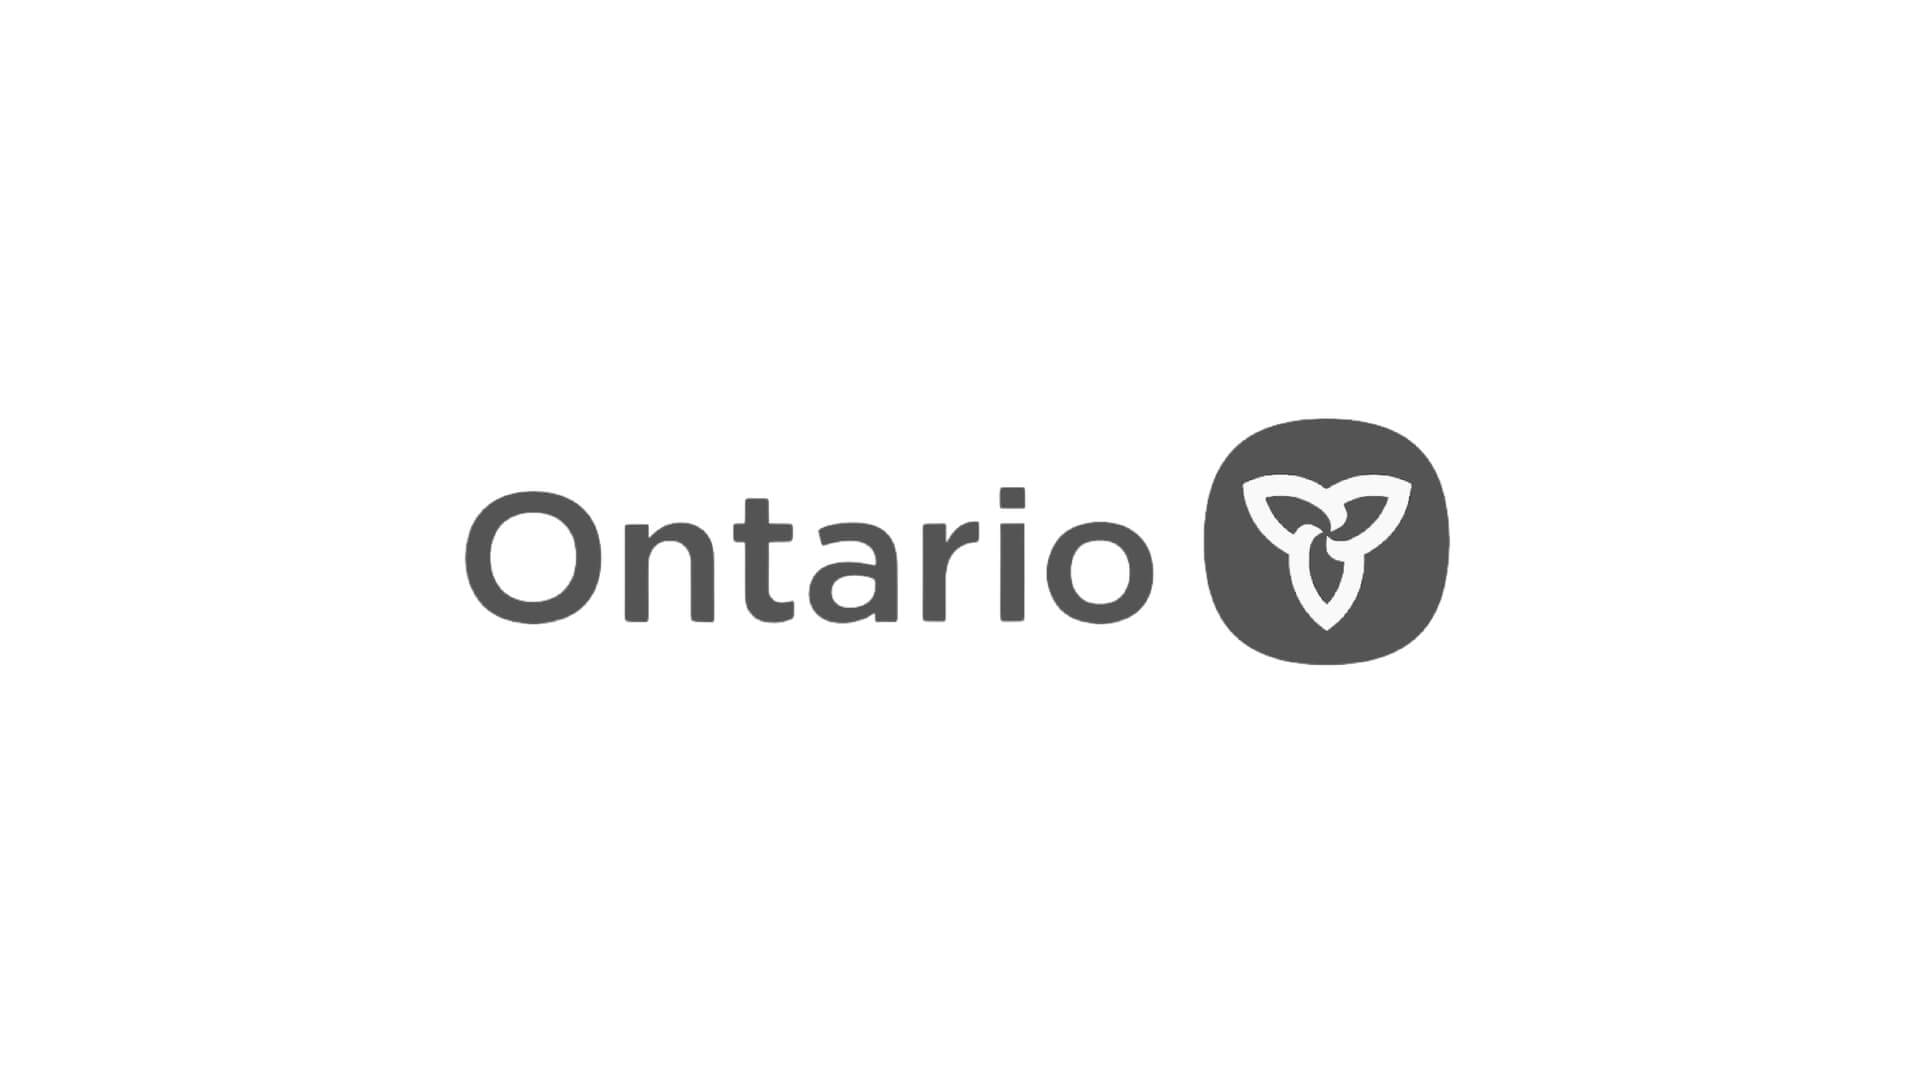 Timmins Care Logo featuring the word "ontario" in gray text with a circular emblem depicting a stylized trillium flower to the right. Cochrane District Social Services Administration Board